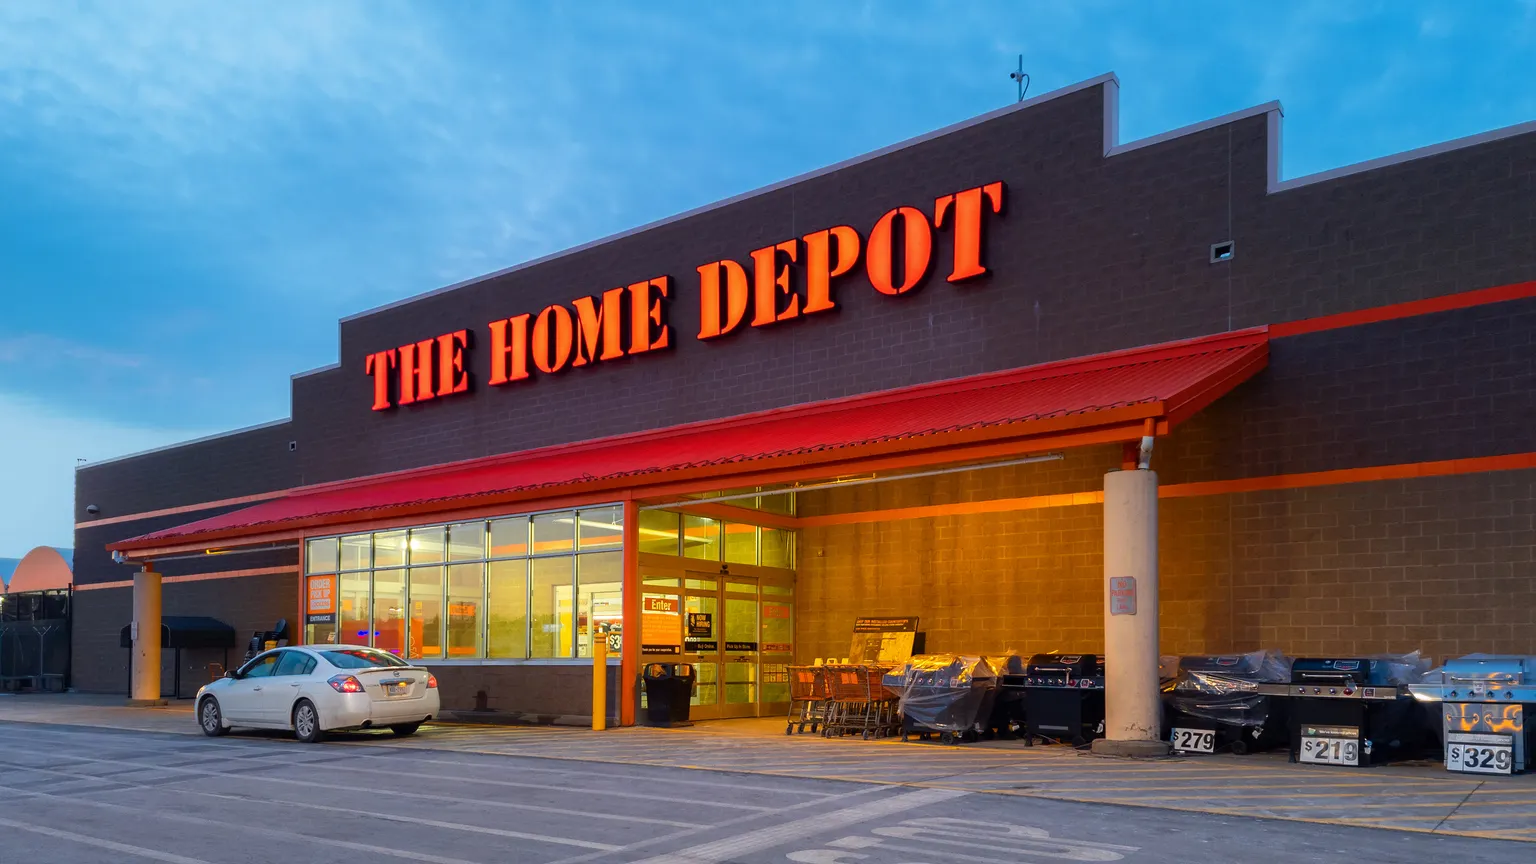 What are Home Depot's Weaknesses?